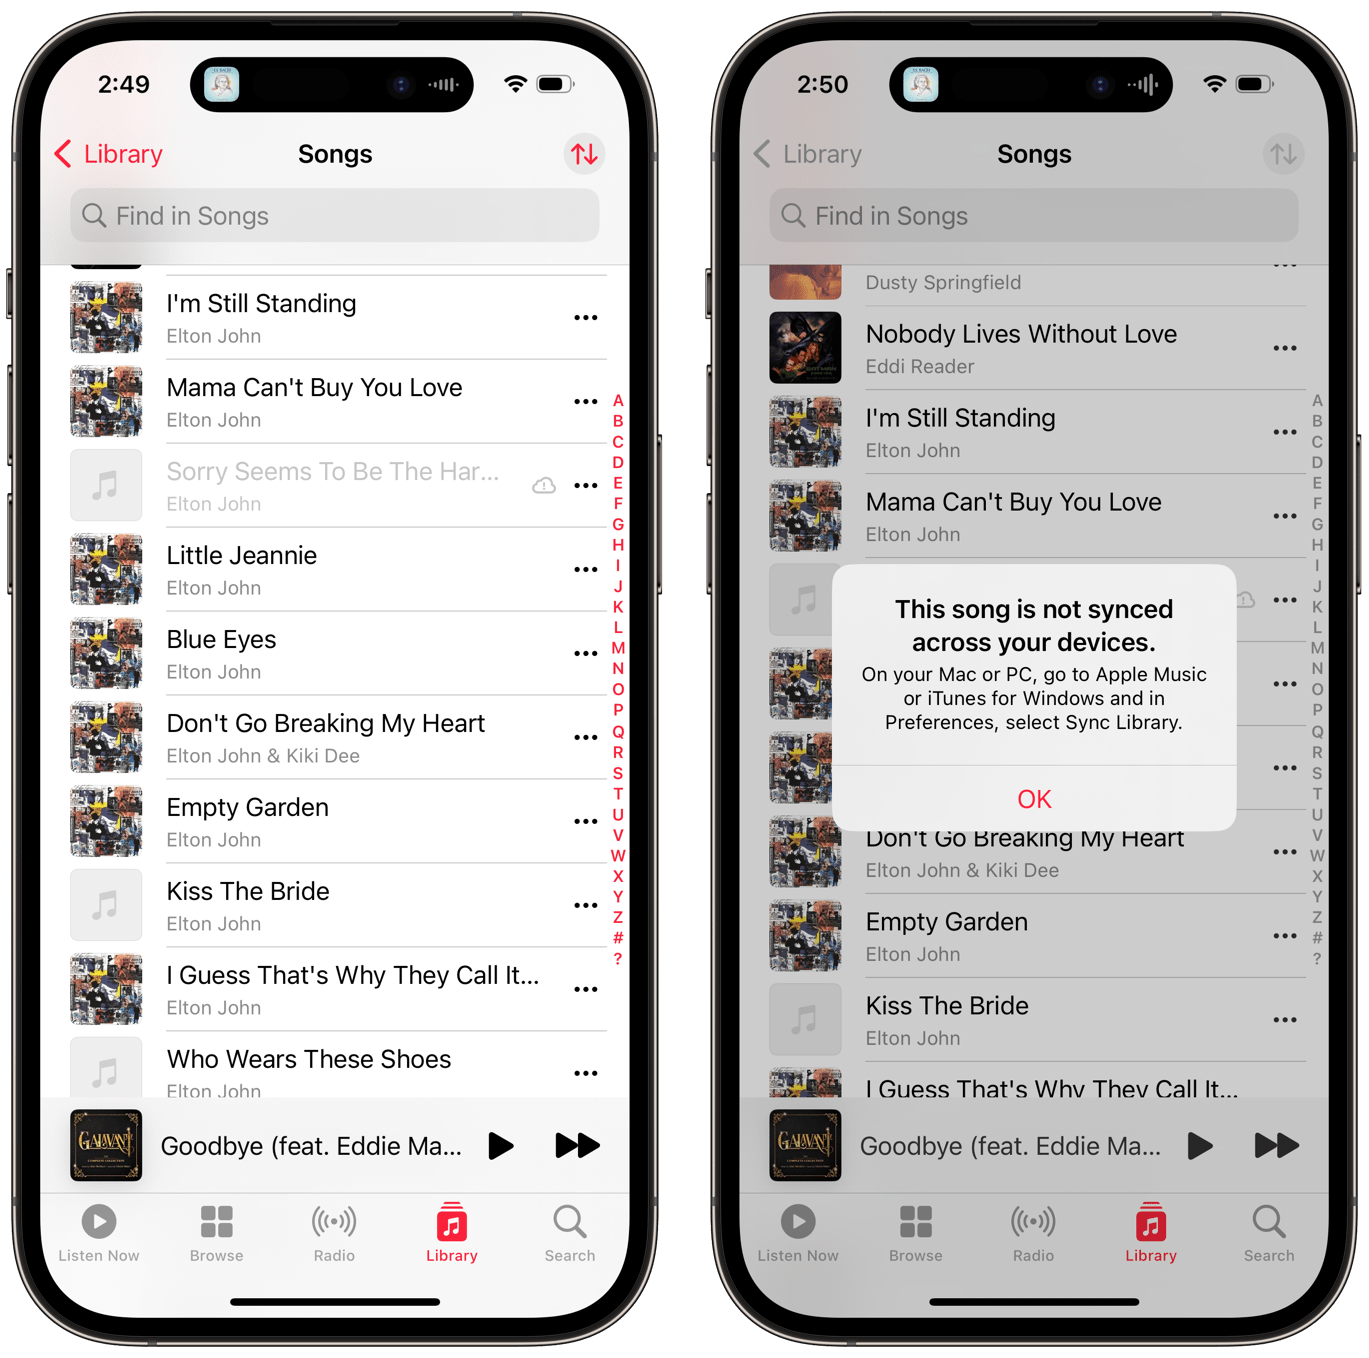 this song is not synced across your devices in Apple Music